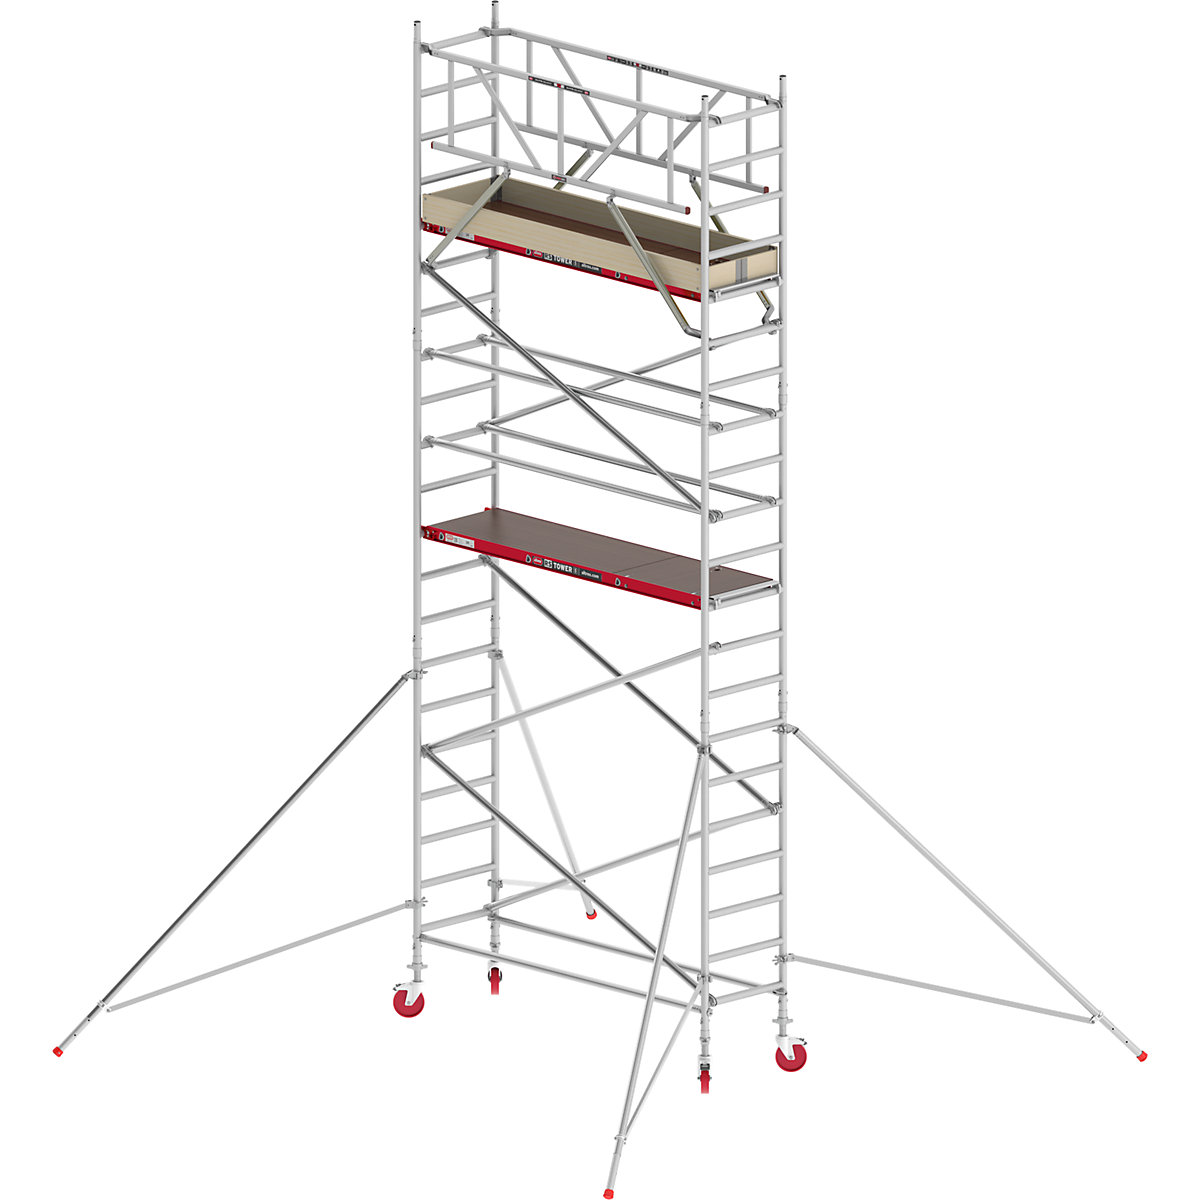 RS TOWER 41 slim mobile access tower – Altrex, wooden platform, length 1.85 m, working height 7.20 m-4